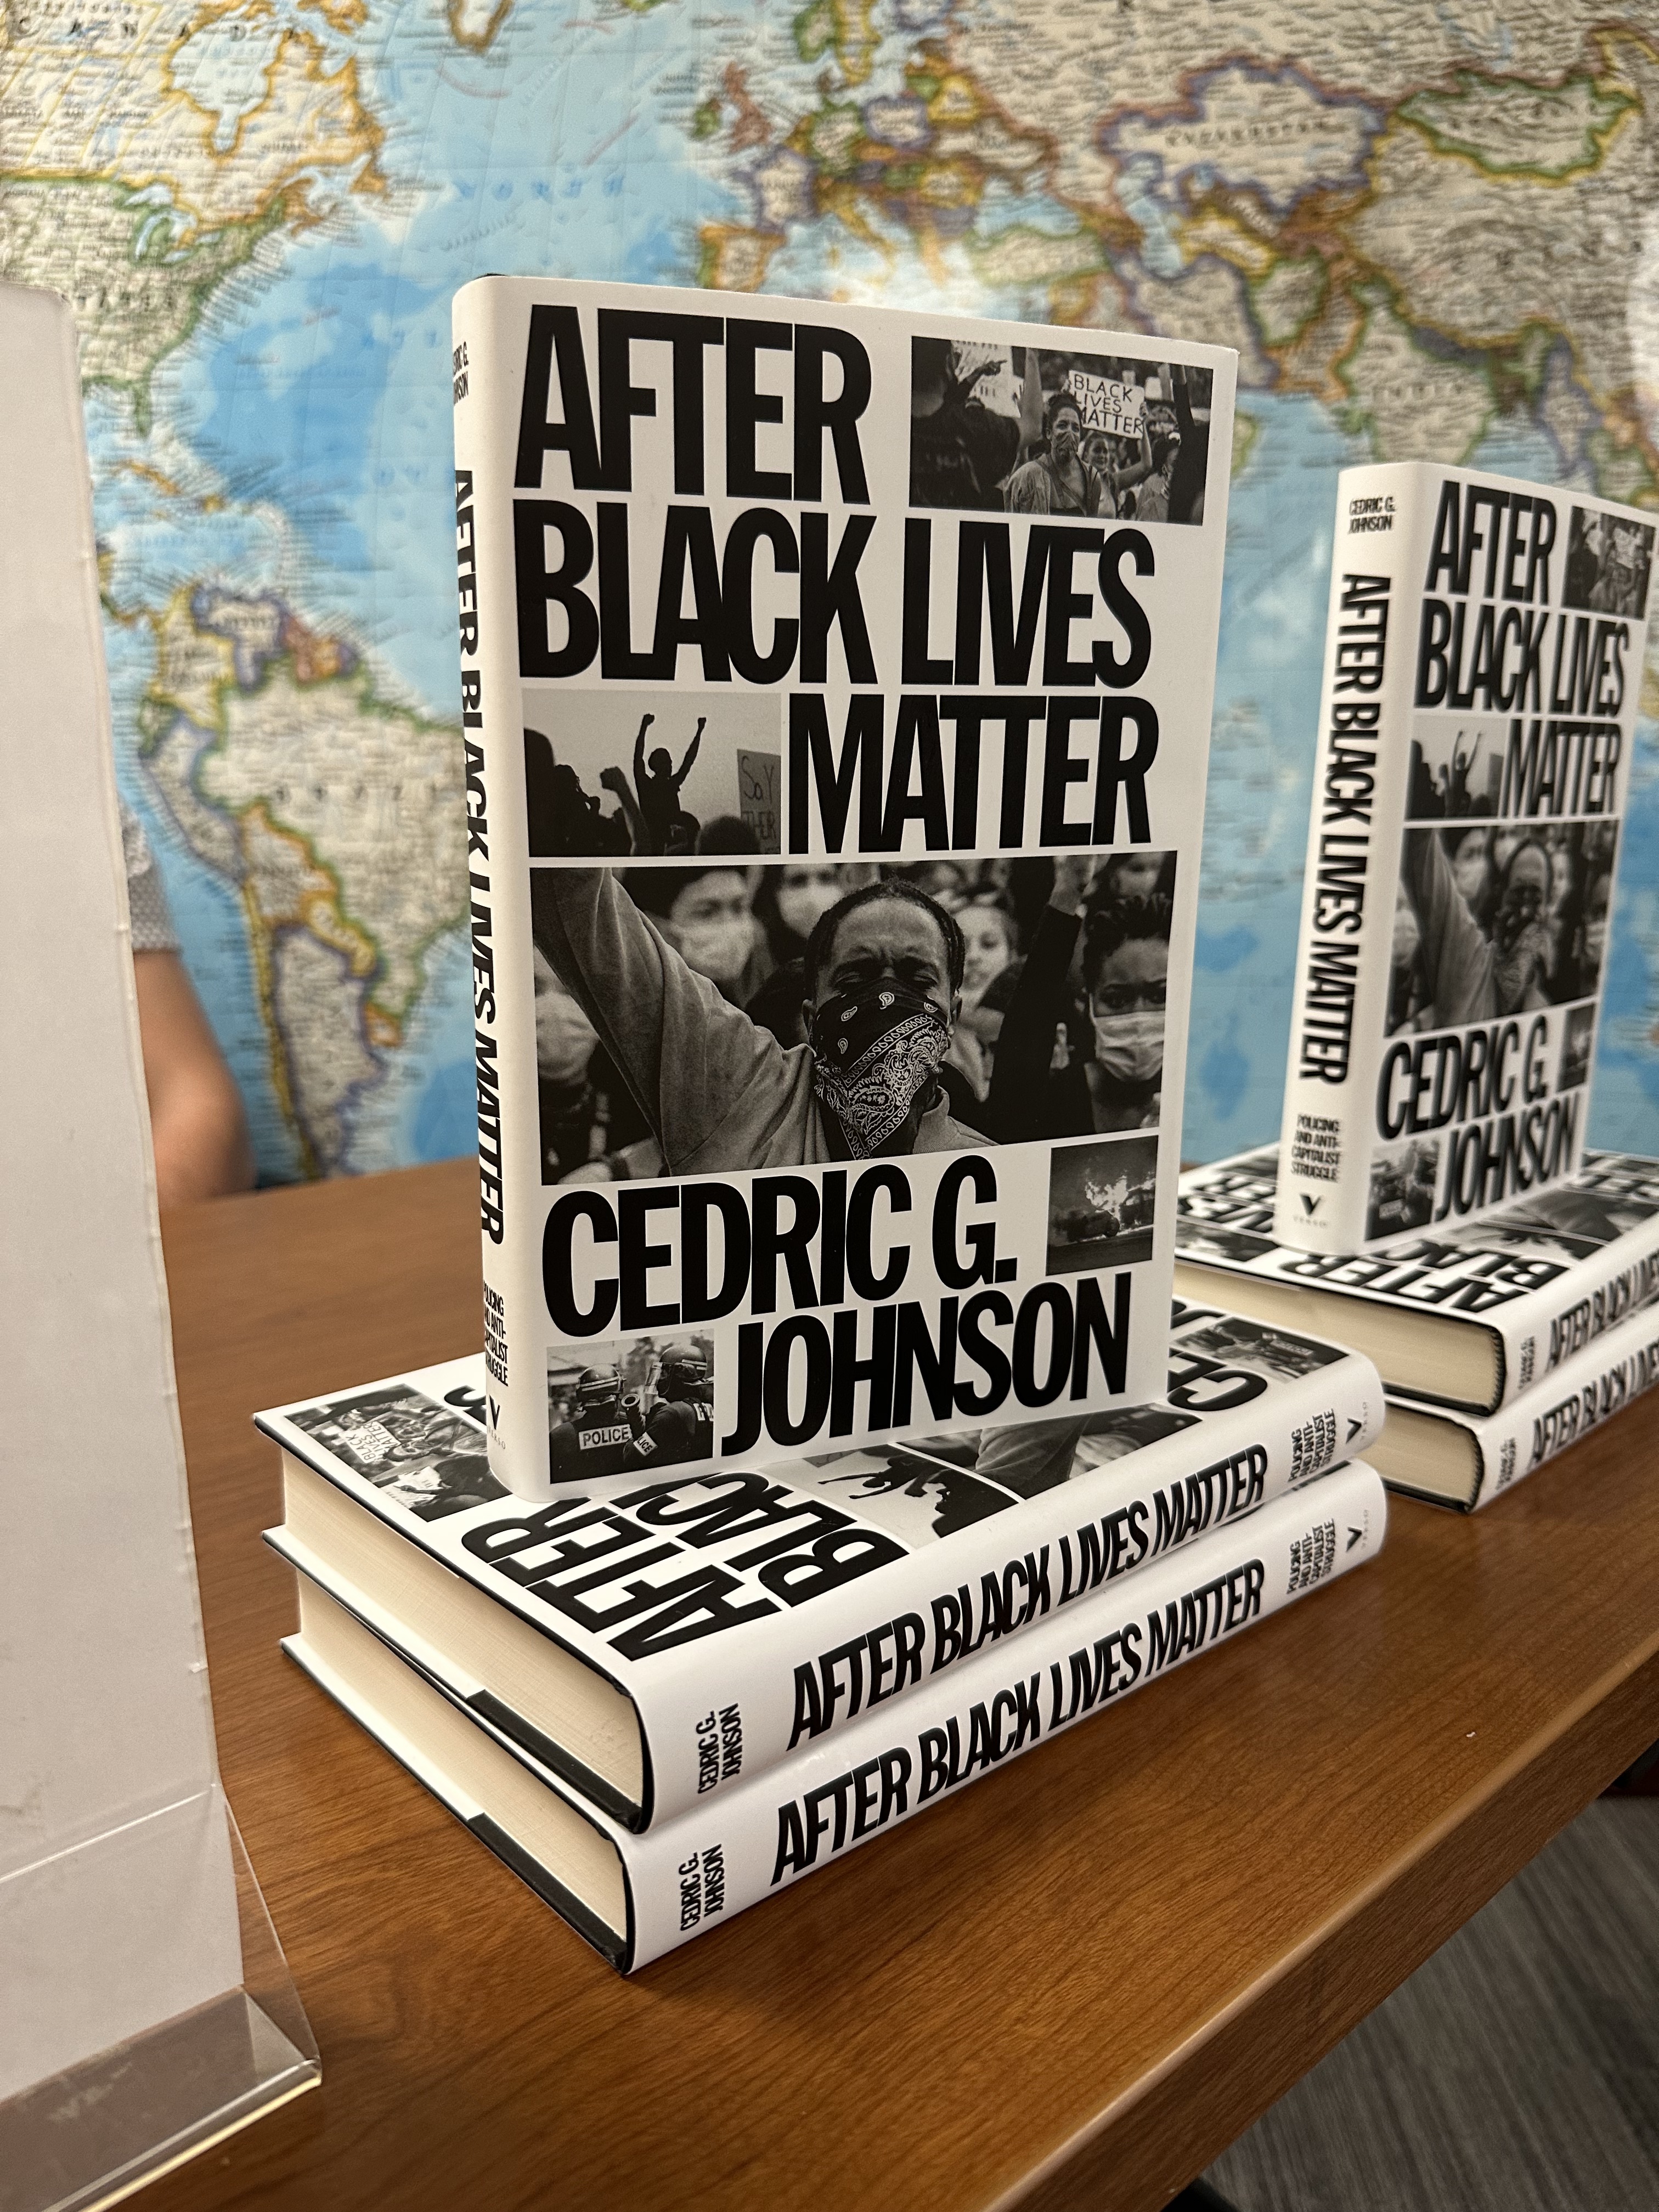 Copies of "After Black Lives Matter" stacked in a pile to be sold.